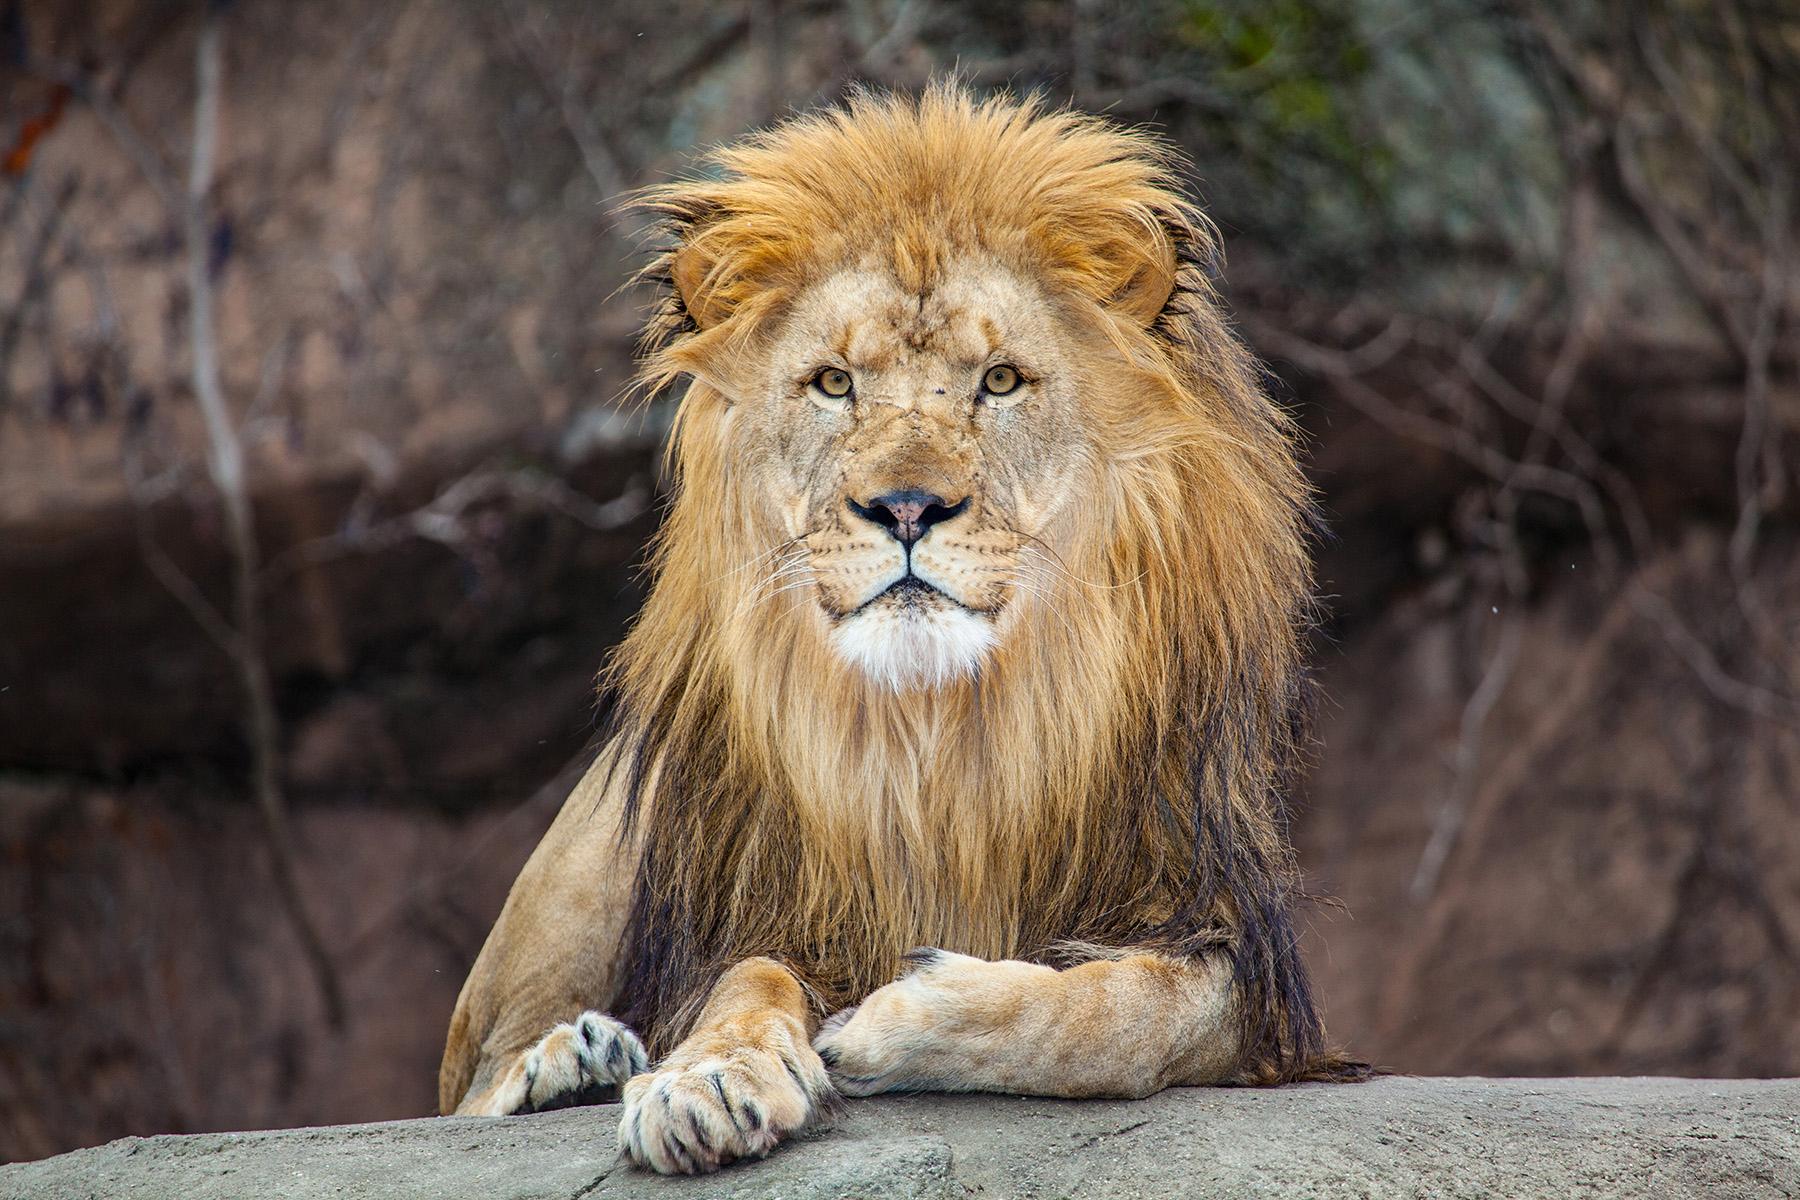 Sahar, Lincoln Park Zoo's 9-year-old male lion, died Sept. 27 while living temporarily at a zoo in Kansas. (Courtesy Lincoln Park Zoo) 